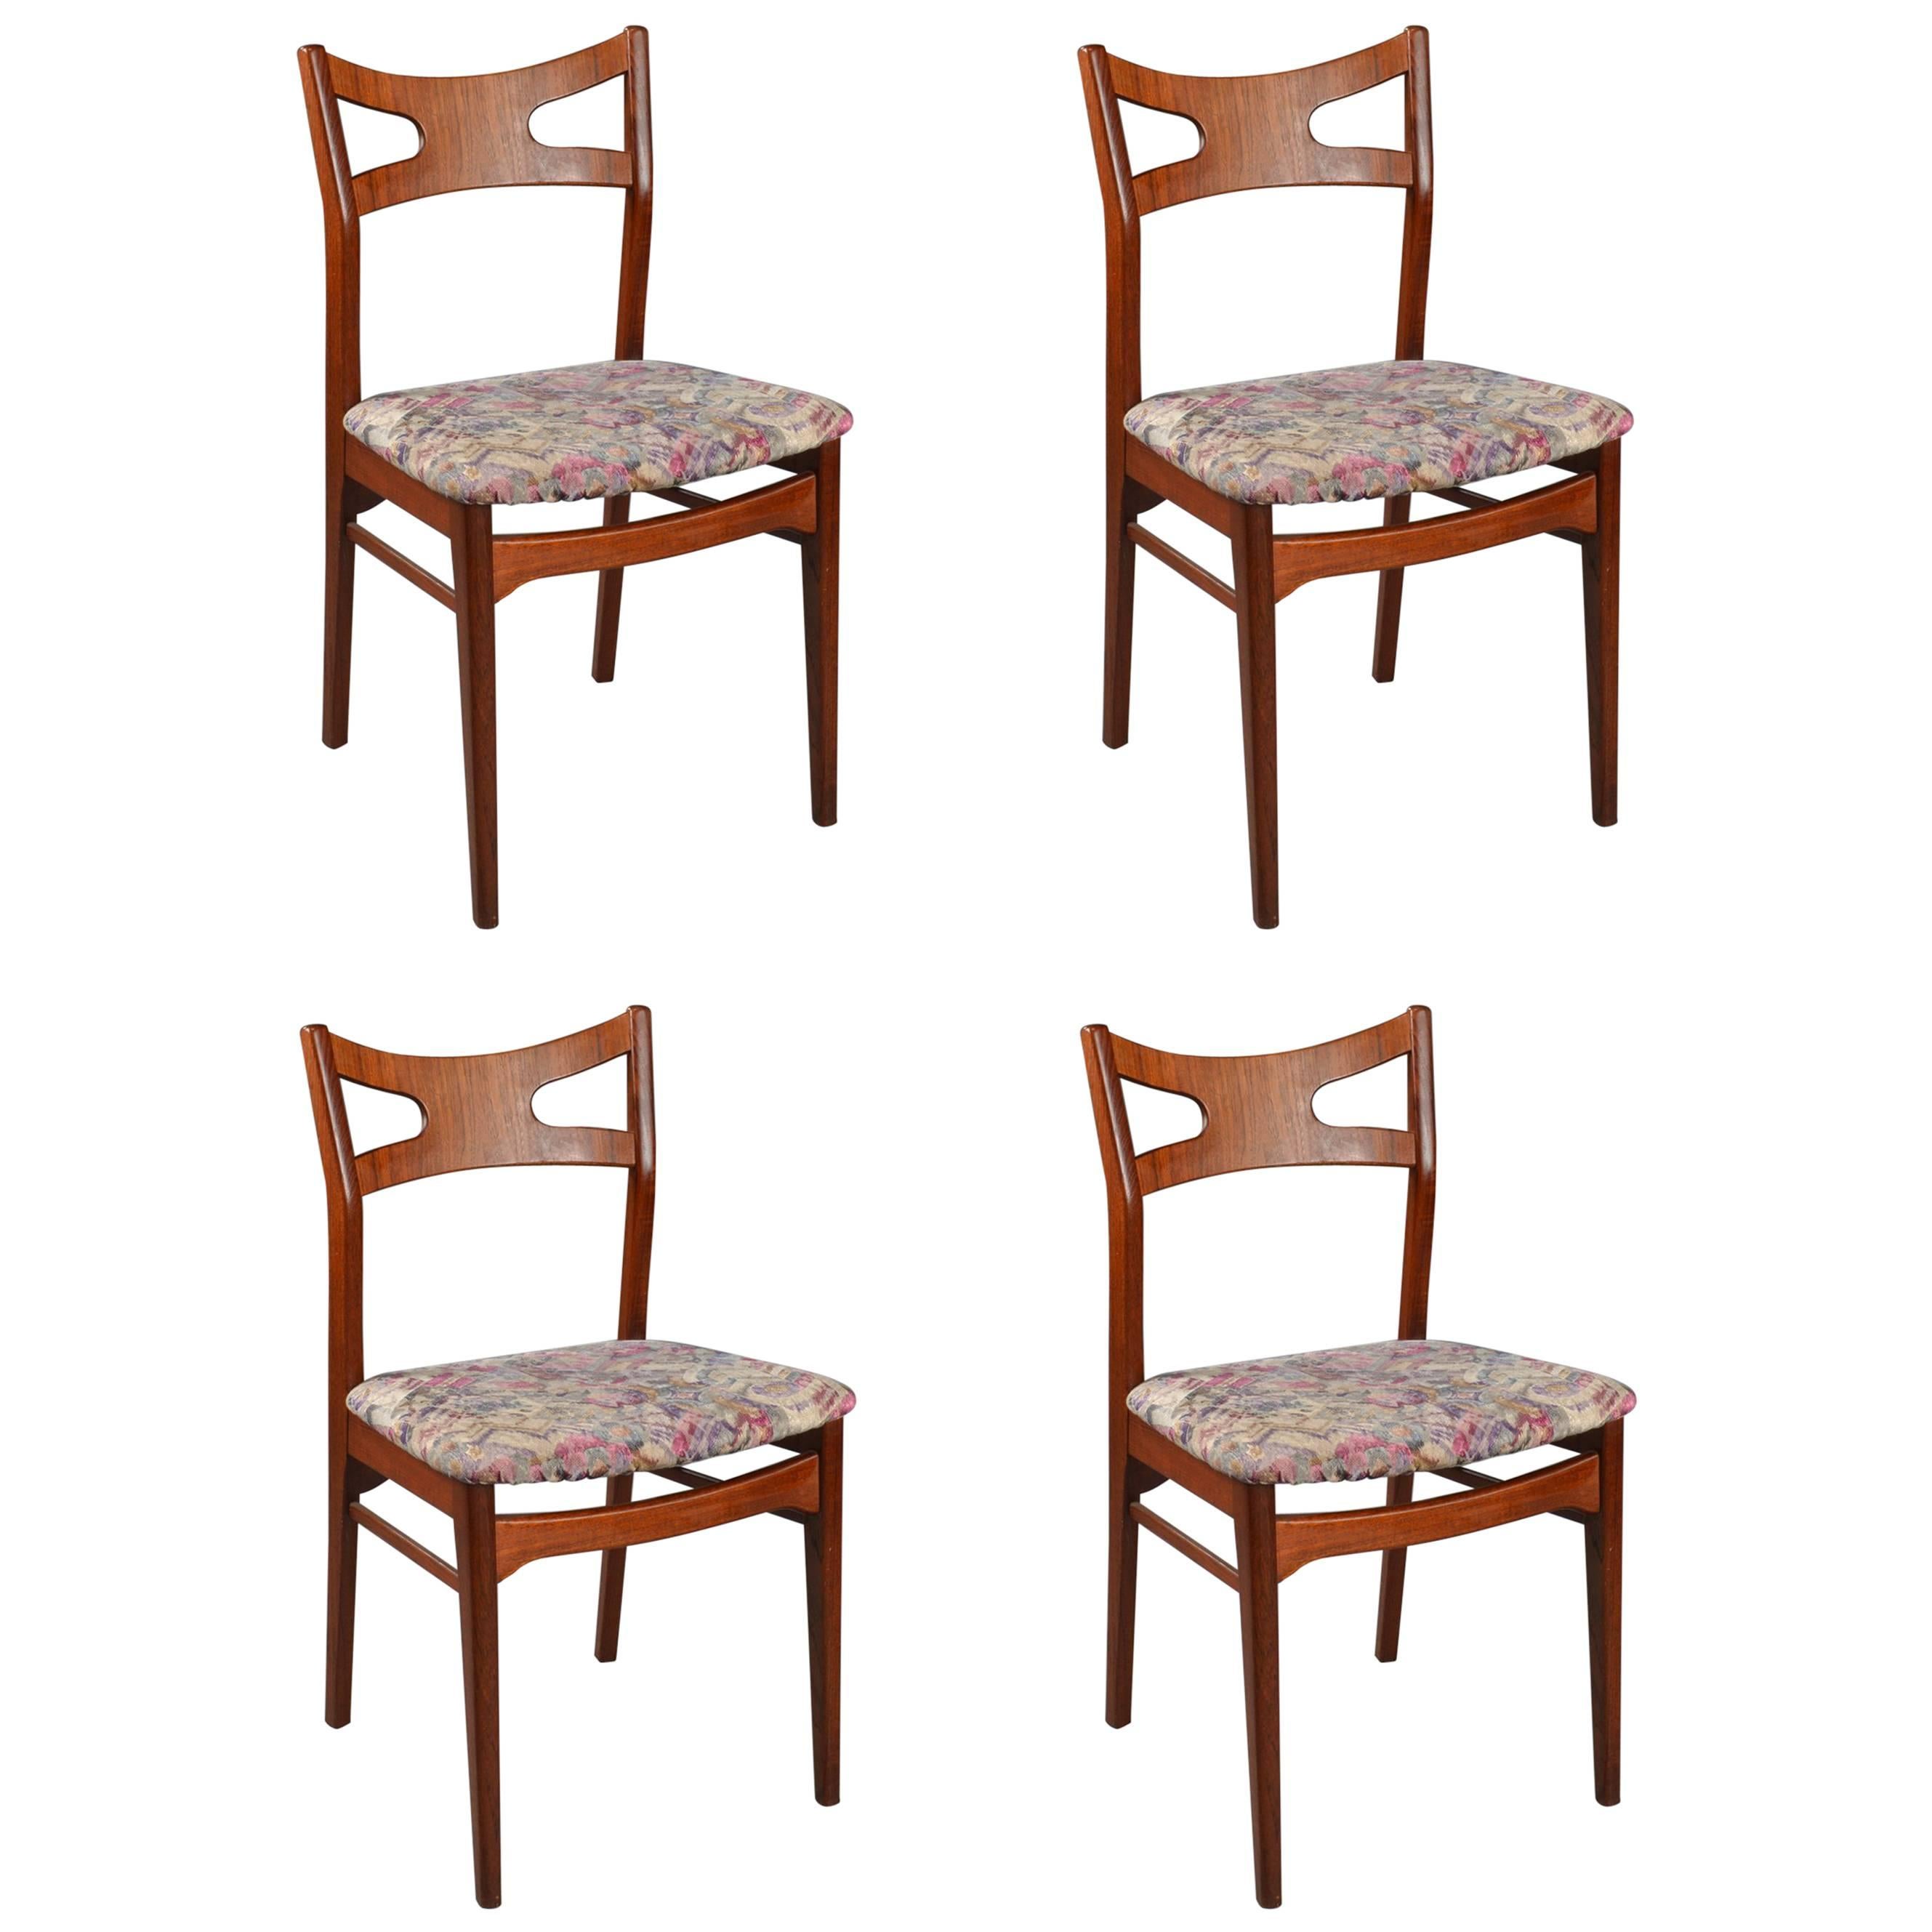 Set of Four Dining Room Chairs in the Art of Hans Wegner